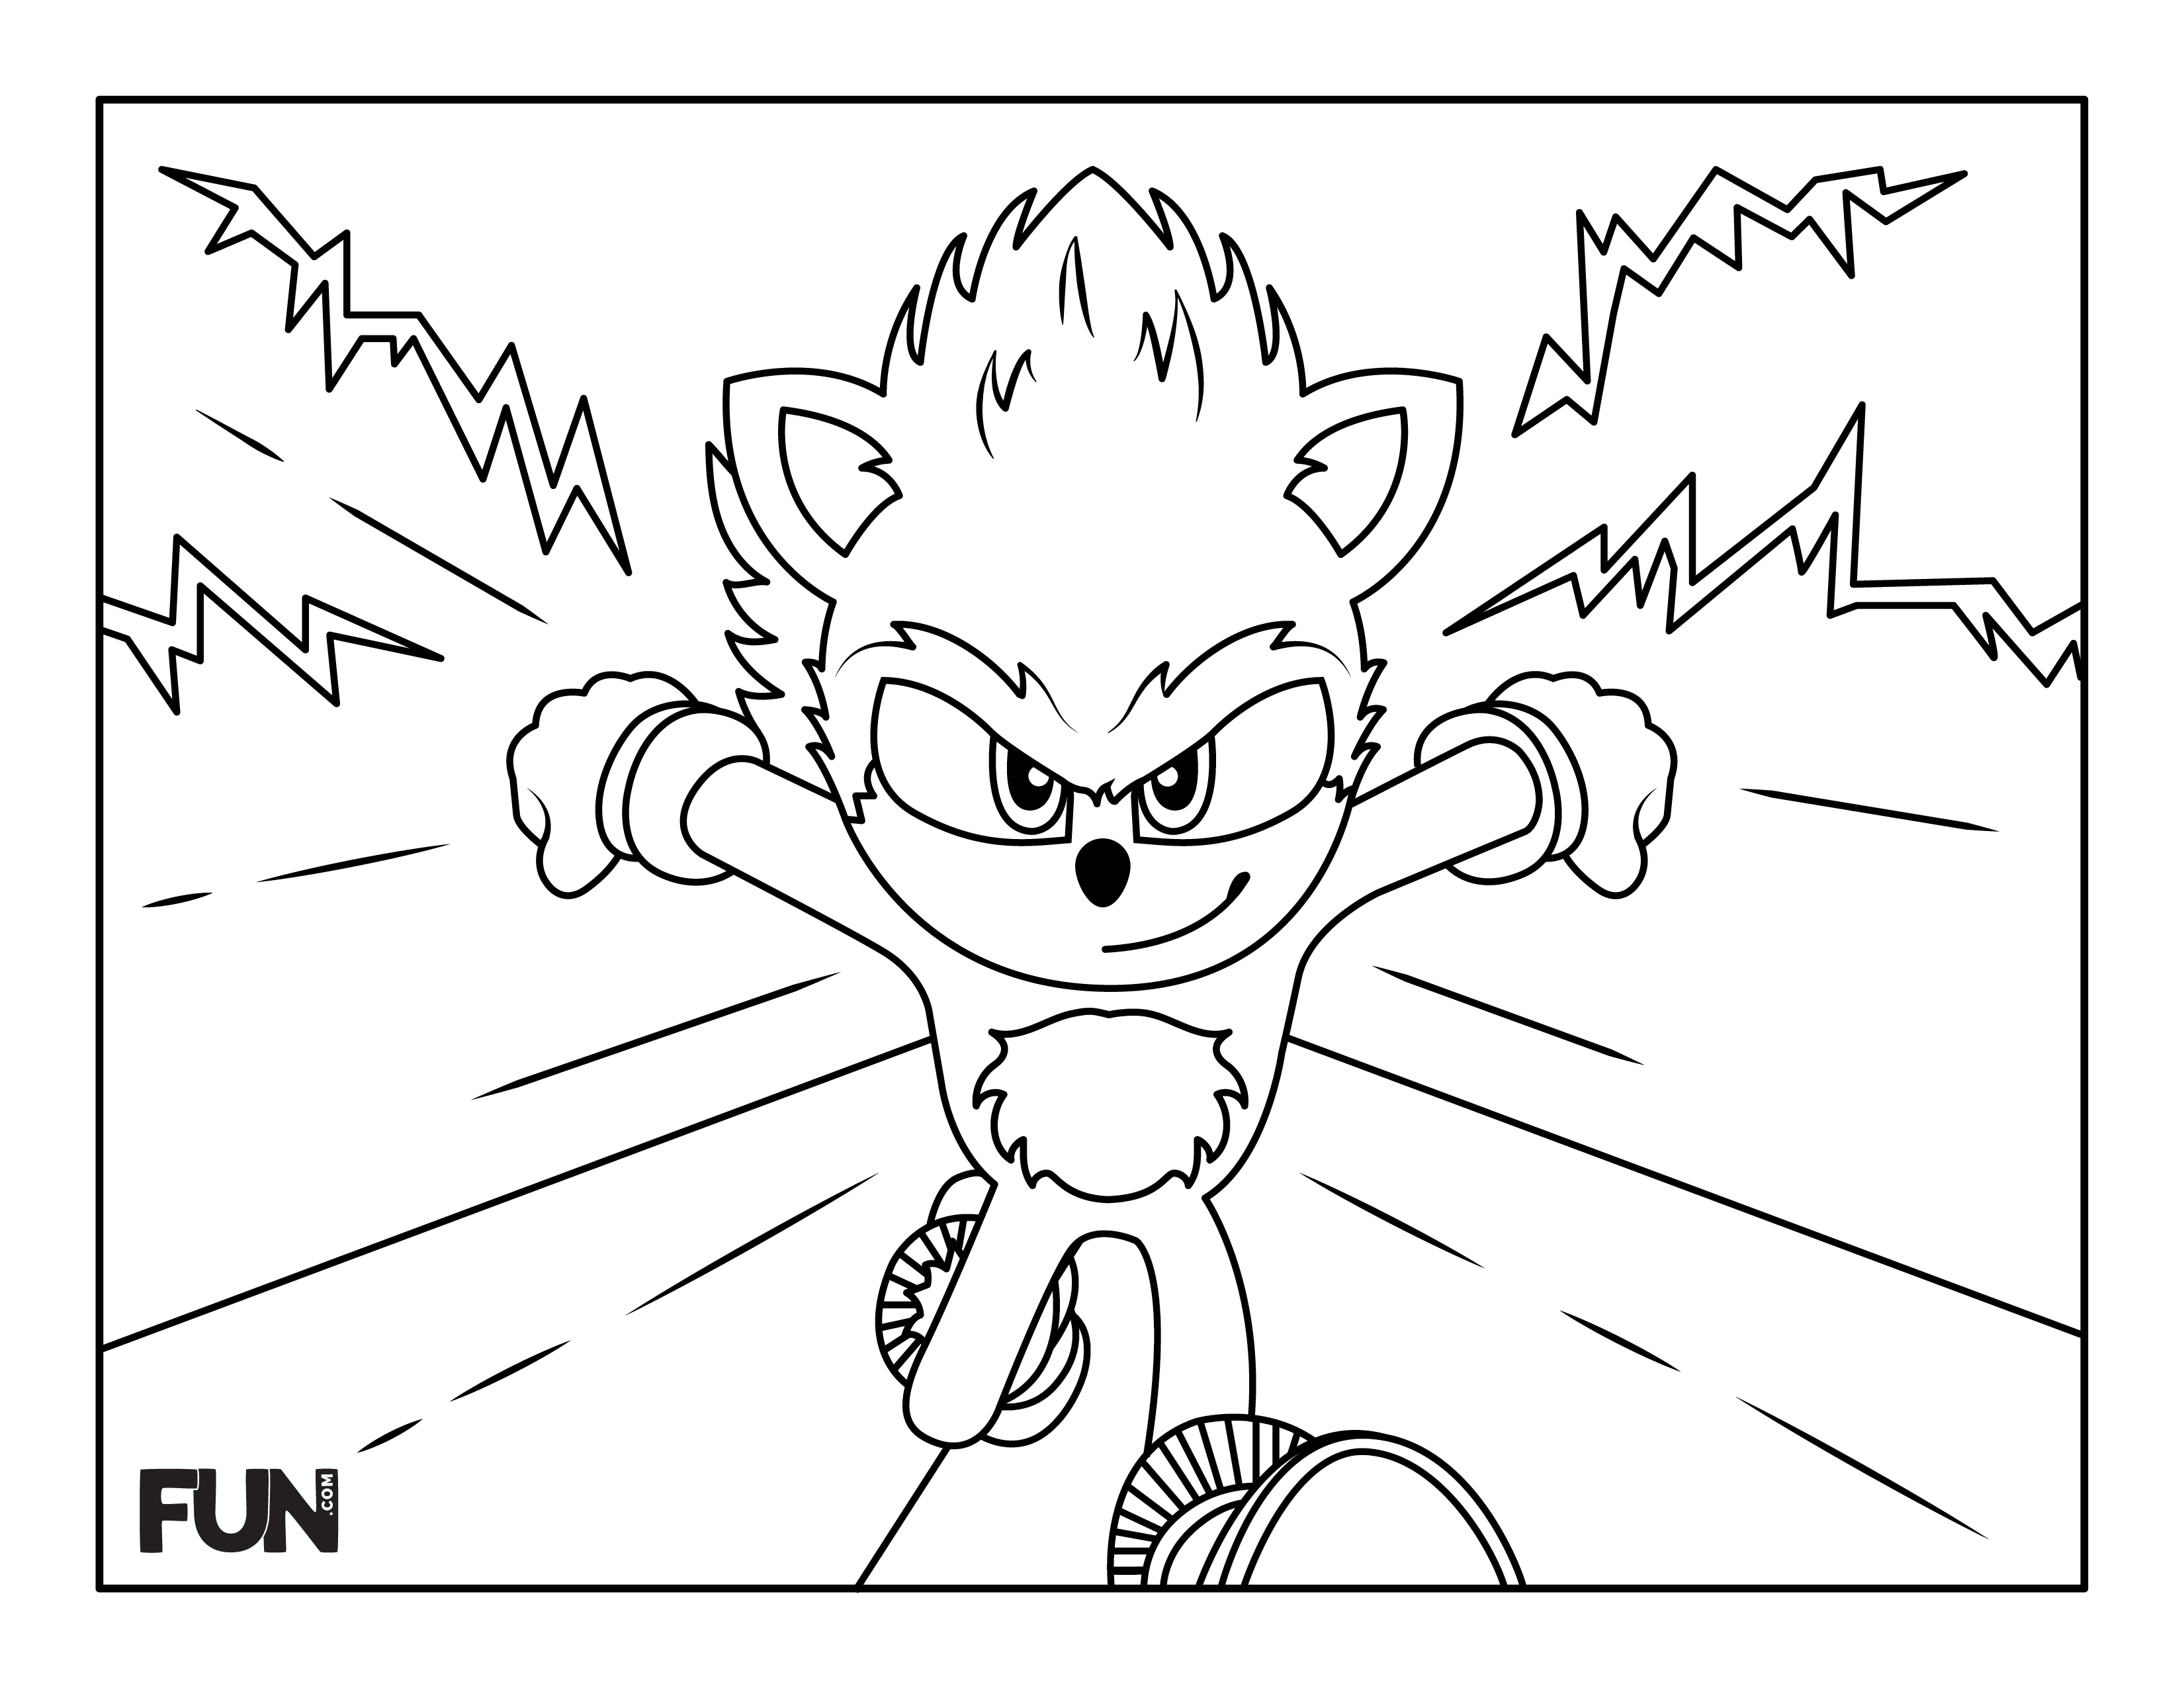 Sonic the Hedgehog coloring page